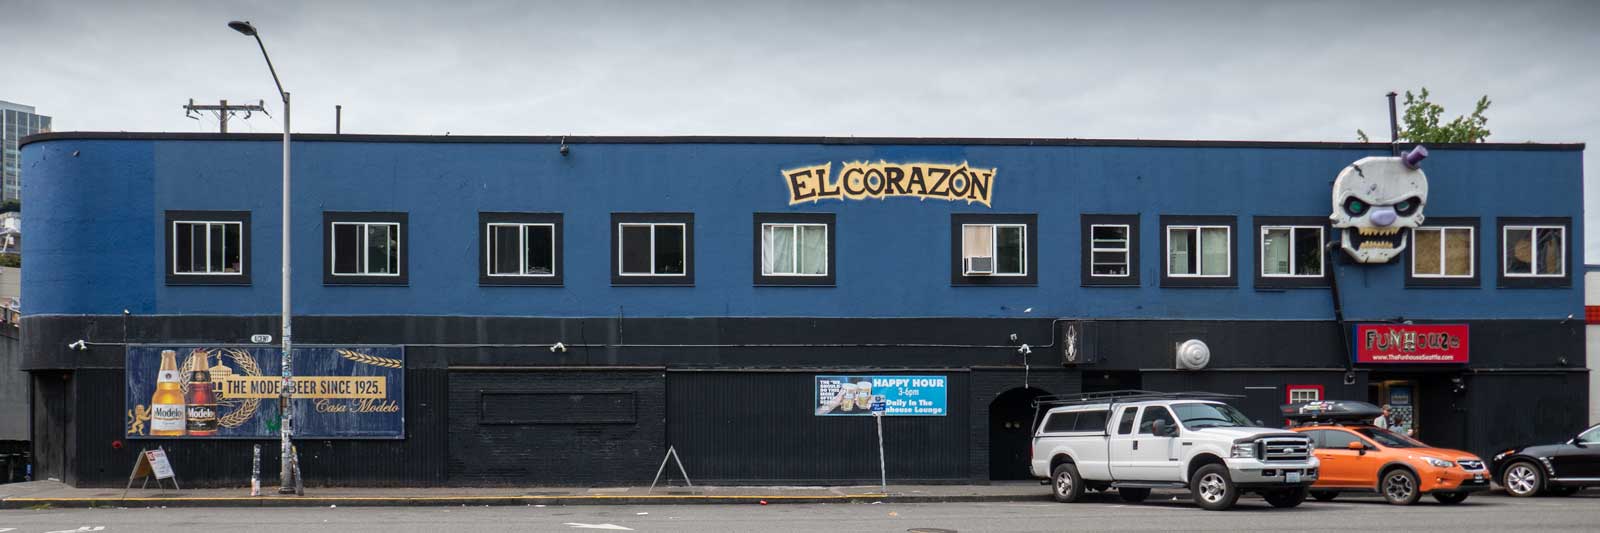 El Corazon (the former Off Ramp) Seattle 